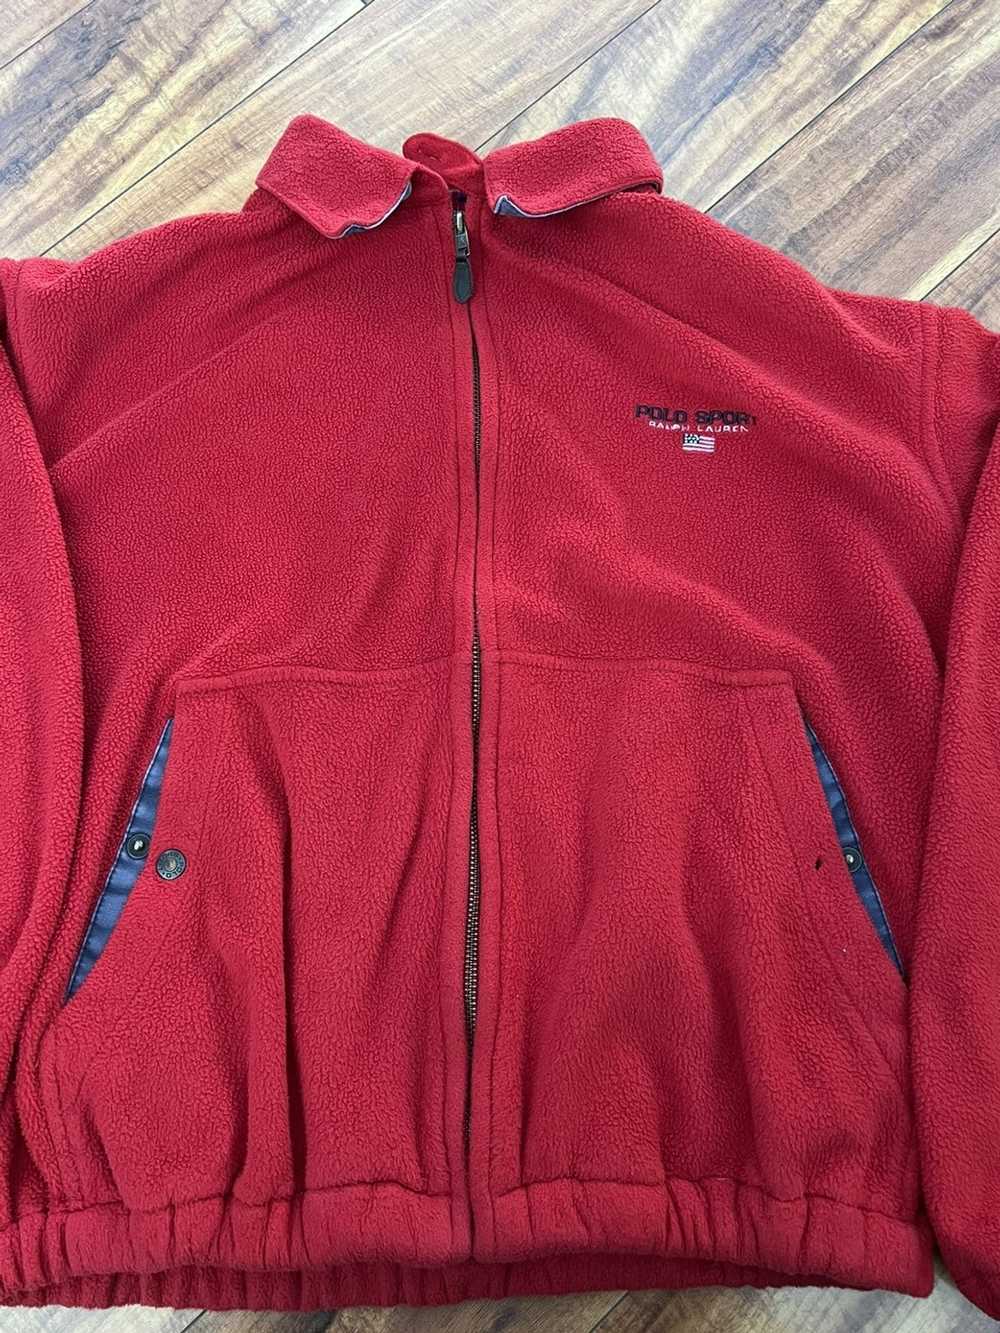 Polo Ralph Lauren Vintage PoloSports red jackets - image 5